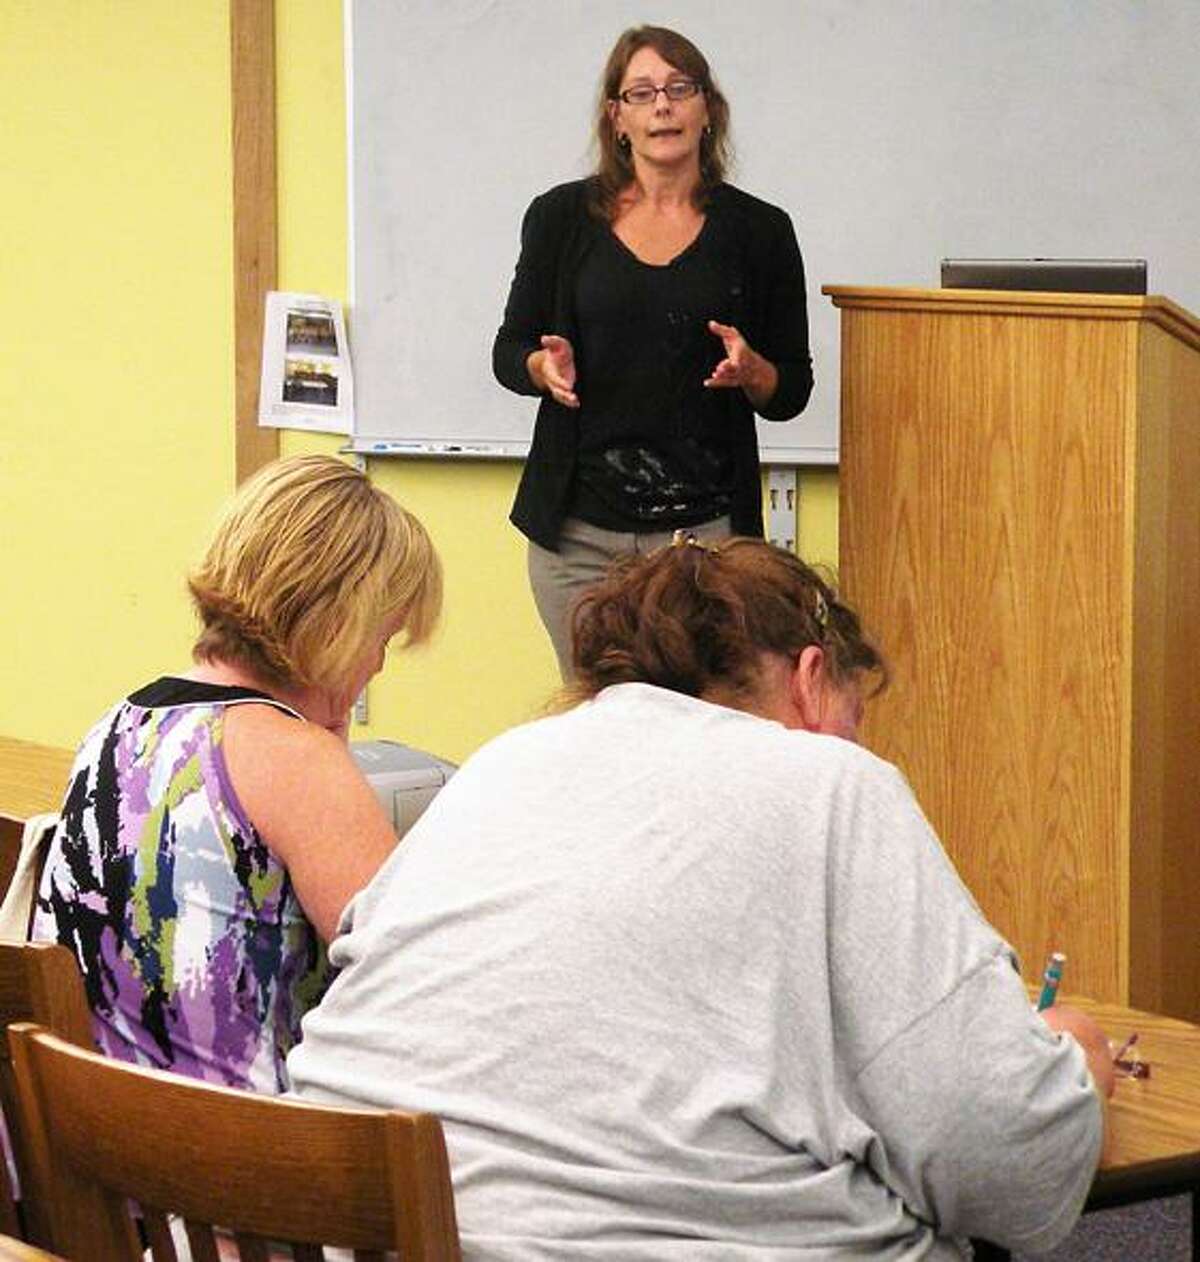 Photo Special to The Dispatch by MICHAEL YEOMAN Gretchen Slater of BRiDGES discusses the effects of bath salts to a group at Chittenago Library Monday evening, Aug. 13, 2012.